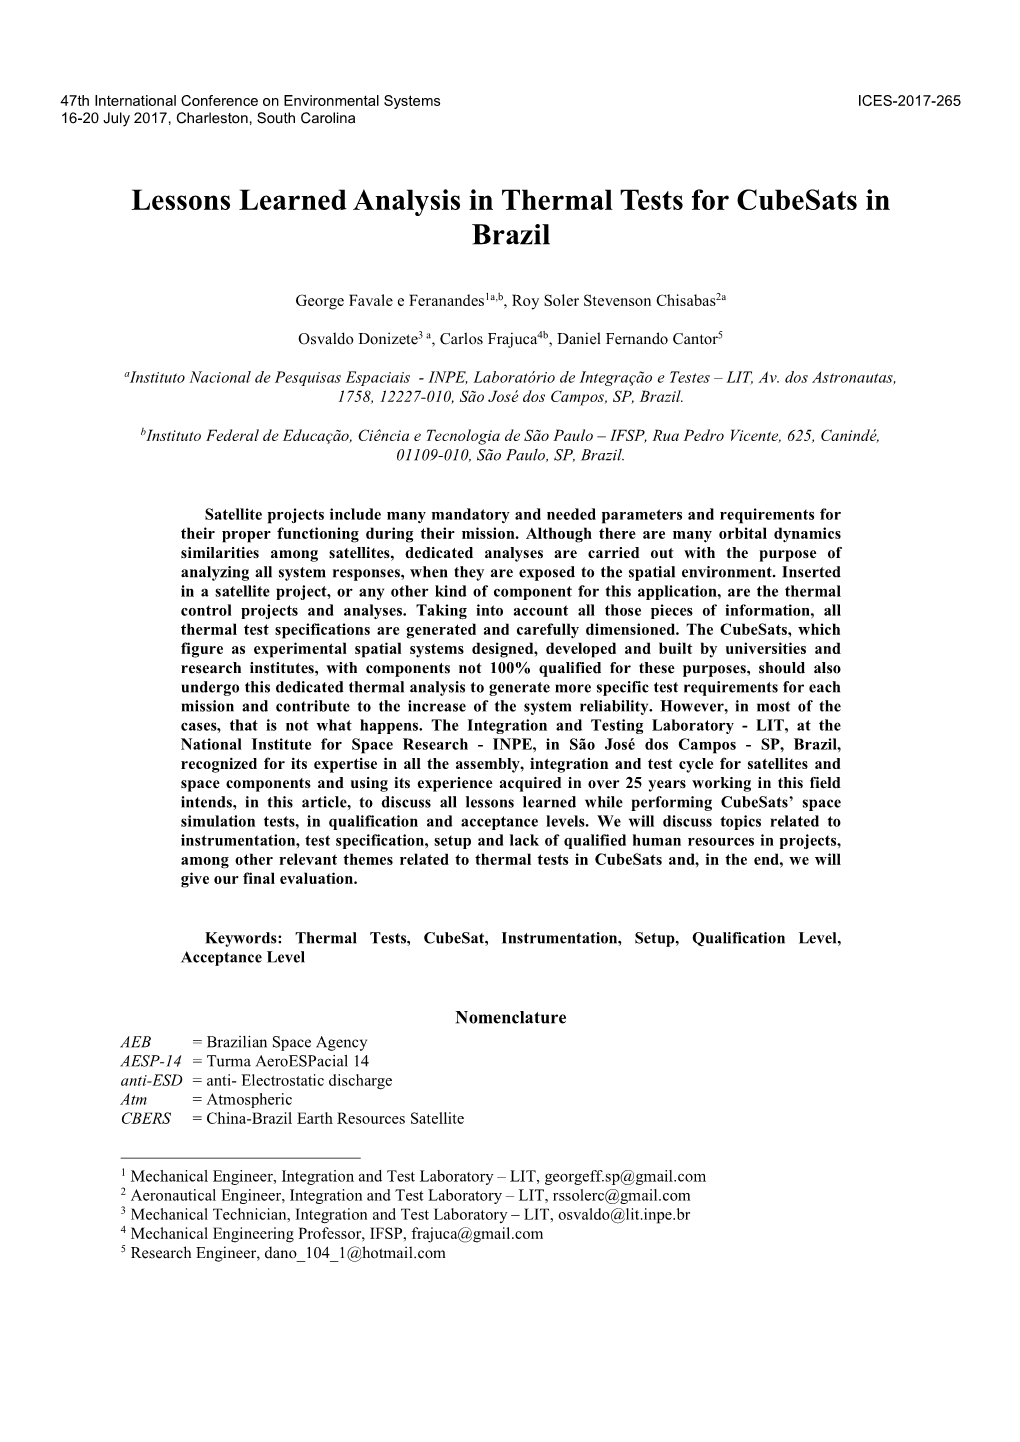 Lessons Learned Analysis in Thermal Tests for Cubesats in Brazil